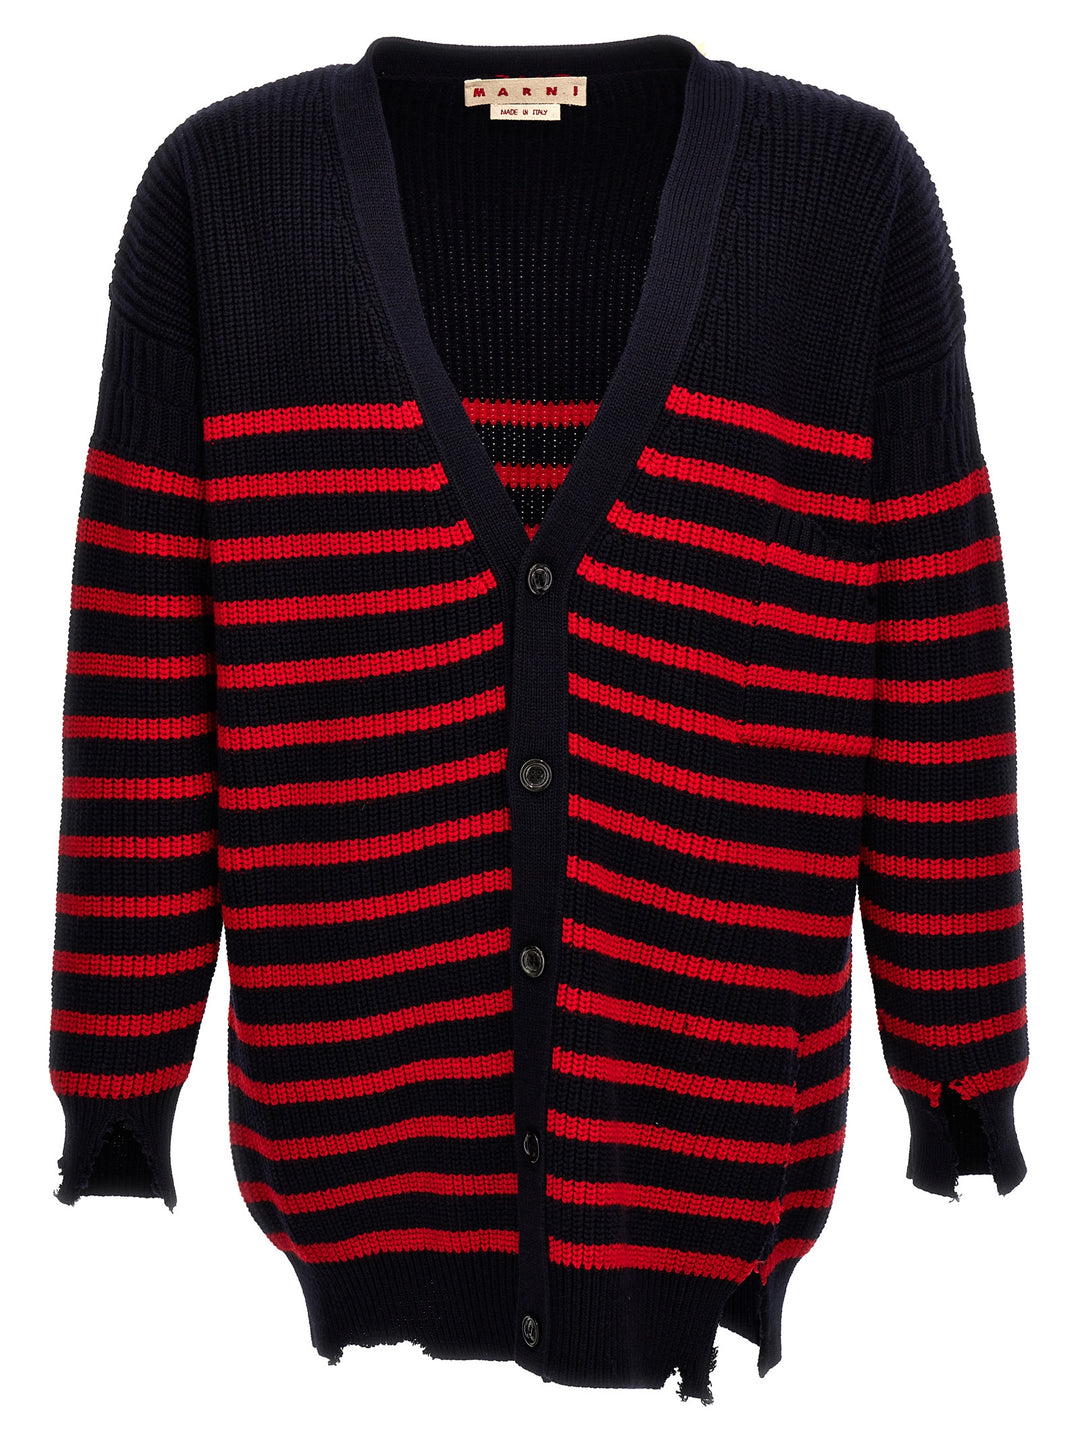 Destroyed Effect Striped Cardigan Maglioni Multicolor